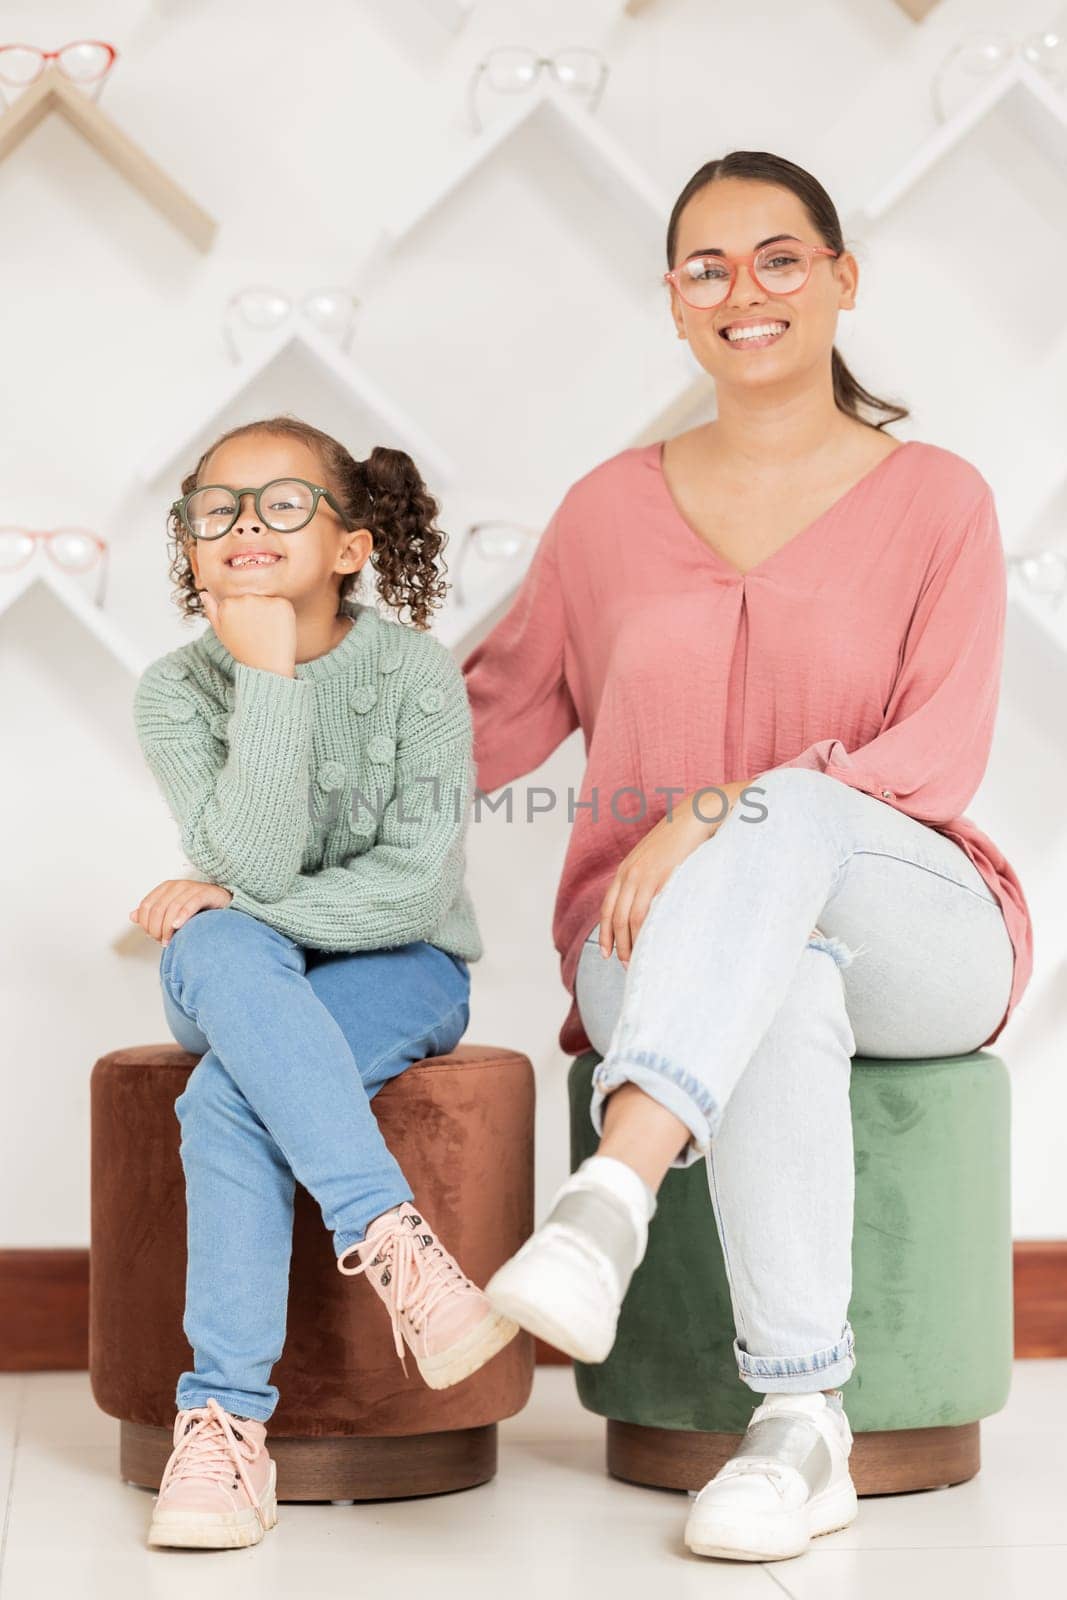 Glasses, portrait and mother with her child at an eye clinic retail store for healthy vision and eyes wellness. Happy customer, mom and young girl enjoys shopping for quality eye care with insurance.